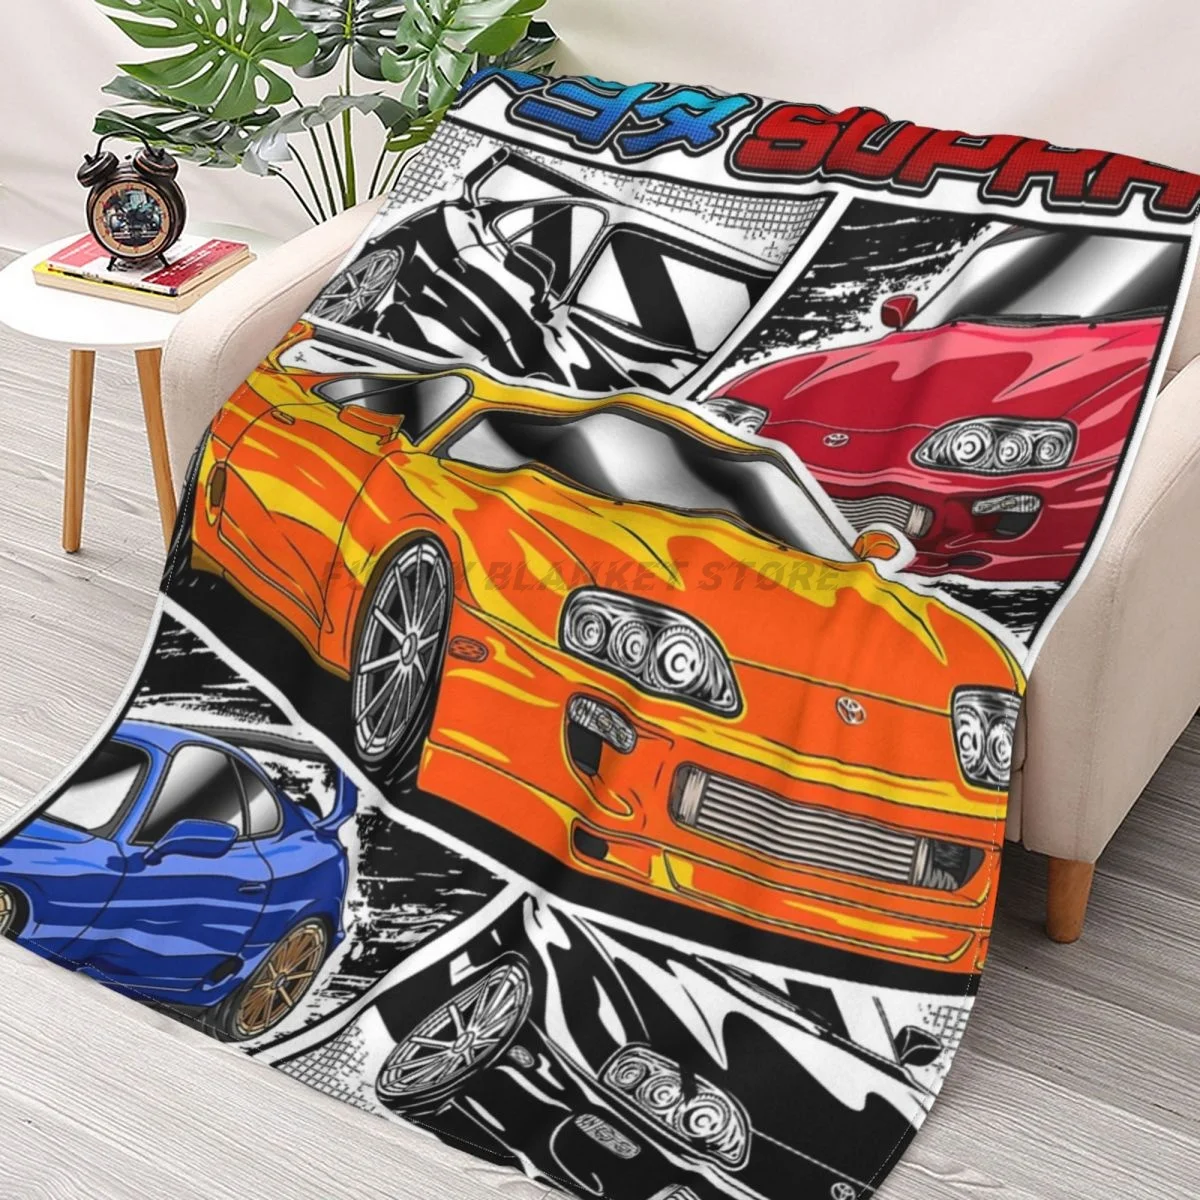 

JDM Legend Toyota Supra MK4 Throws Blankets Collage Flannel Ultra-Soft Warm picnic blanket bedspread on the bed